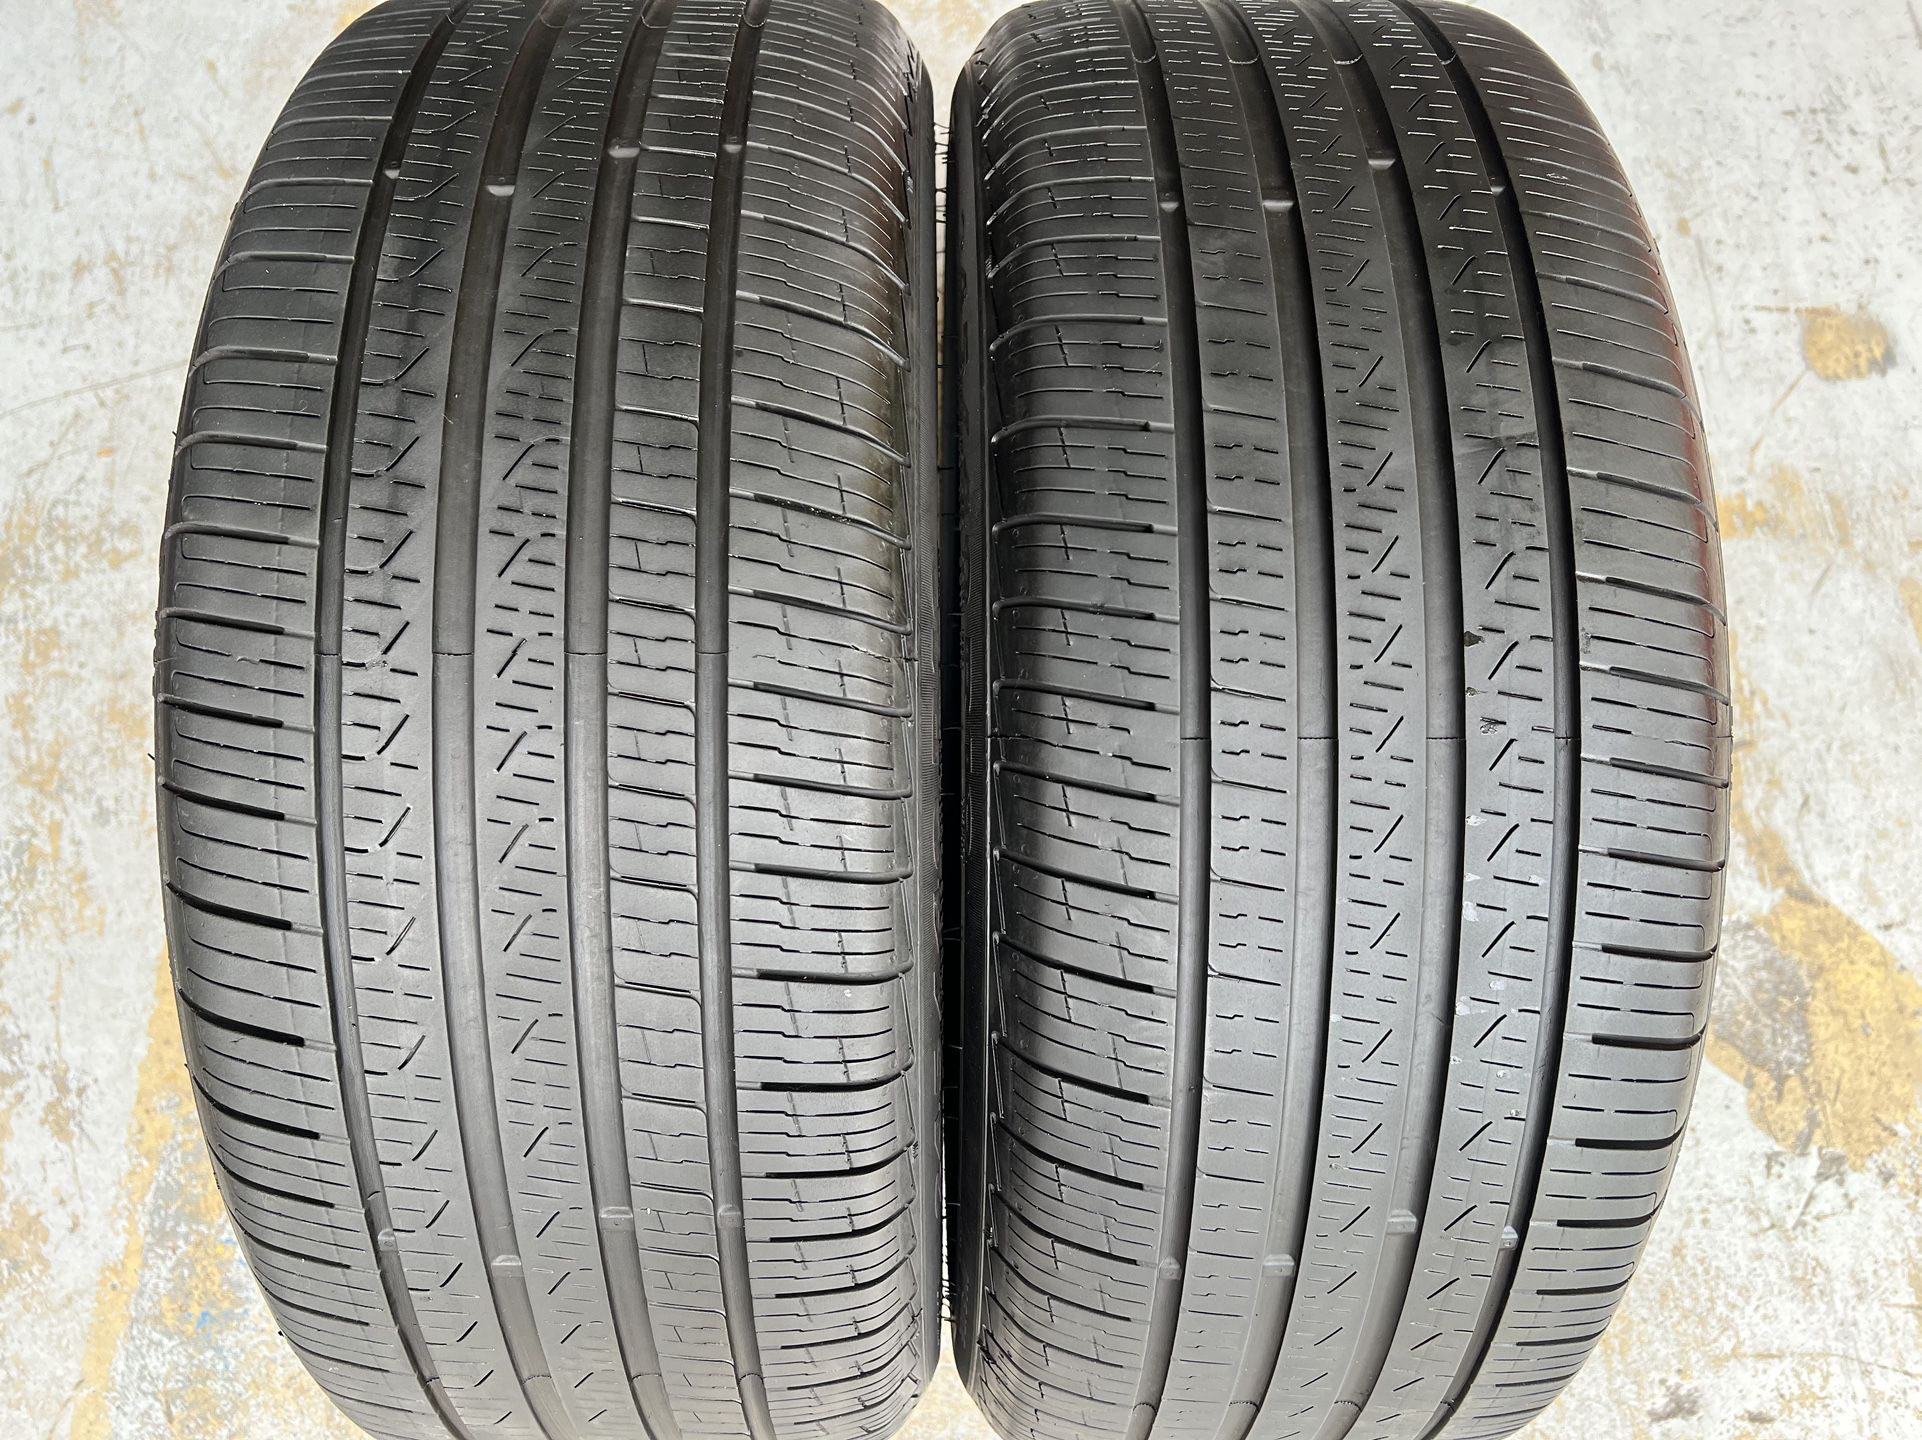 For Sale Two 245/40/19 Pirelli Cinturato P7 Runflats With 75% Left  Excellent Pair Bmw Mercedes Infiniti